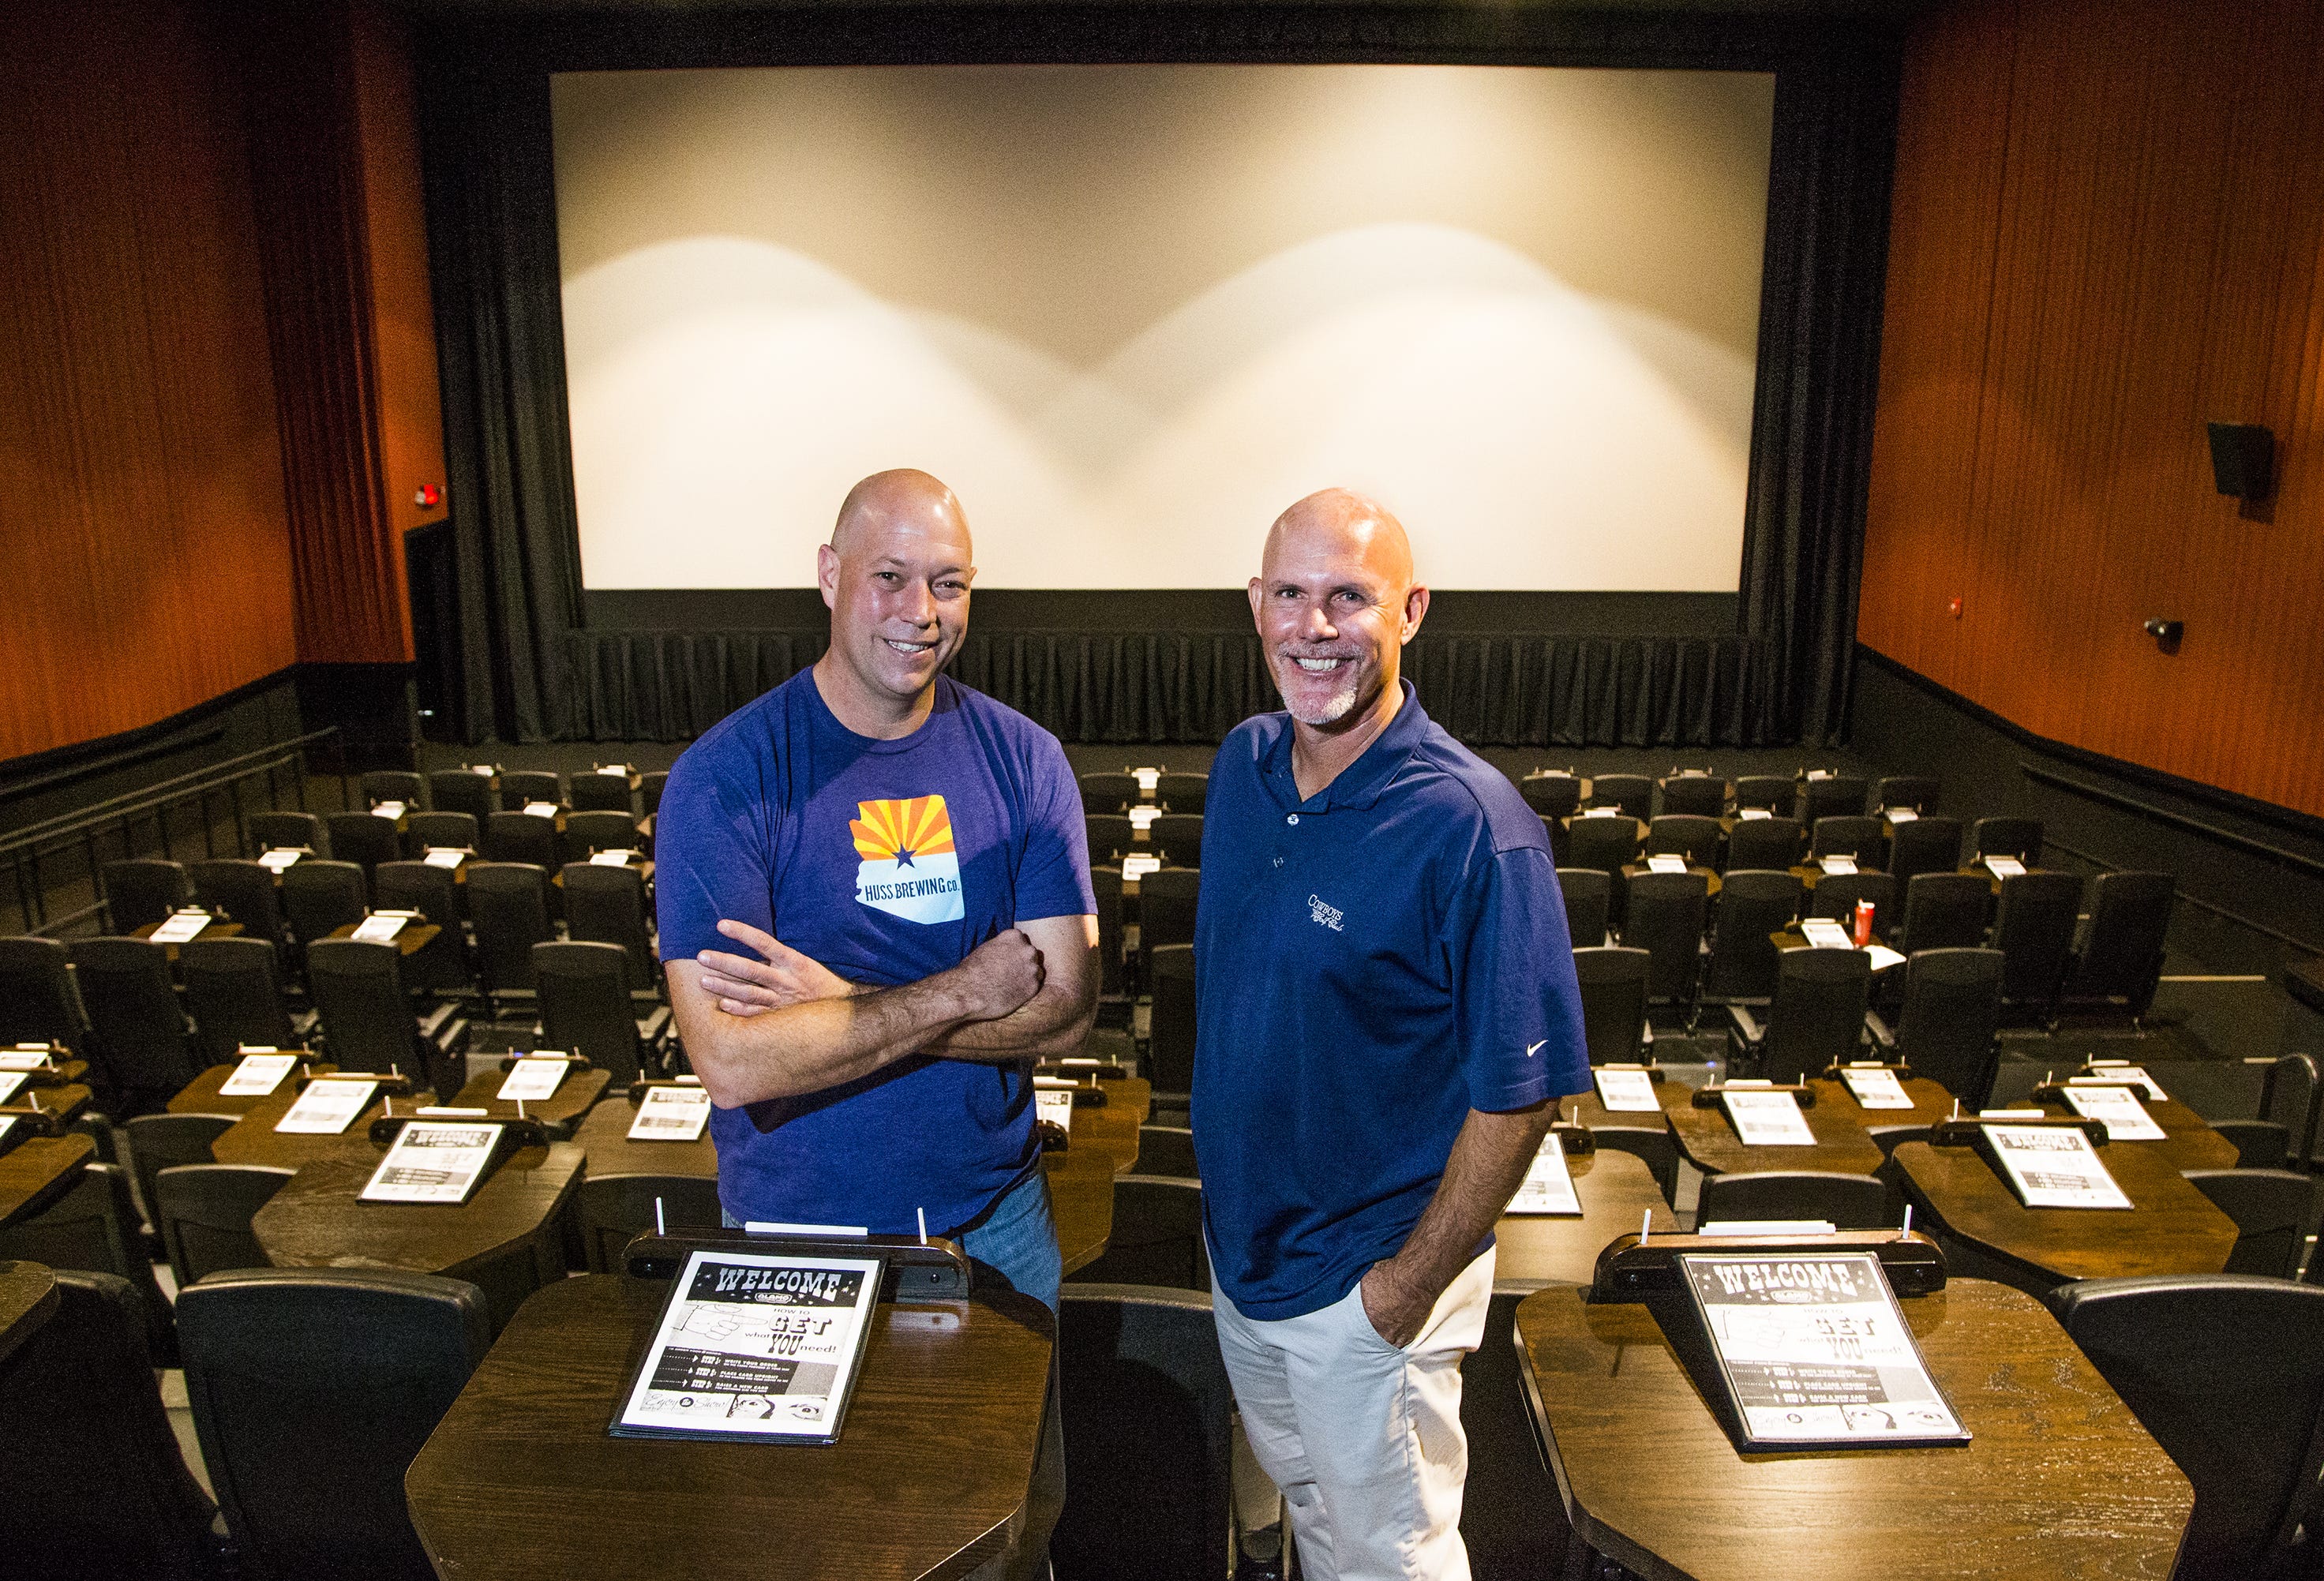 Dinner, drinks and a flick: Dine-in movie theaters coming to Chandler, Tempe